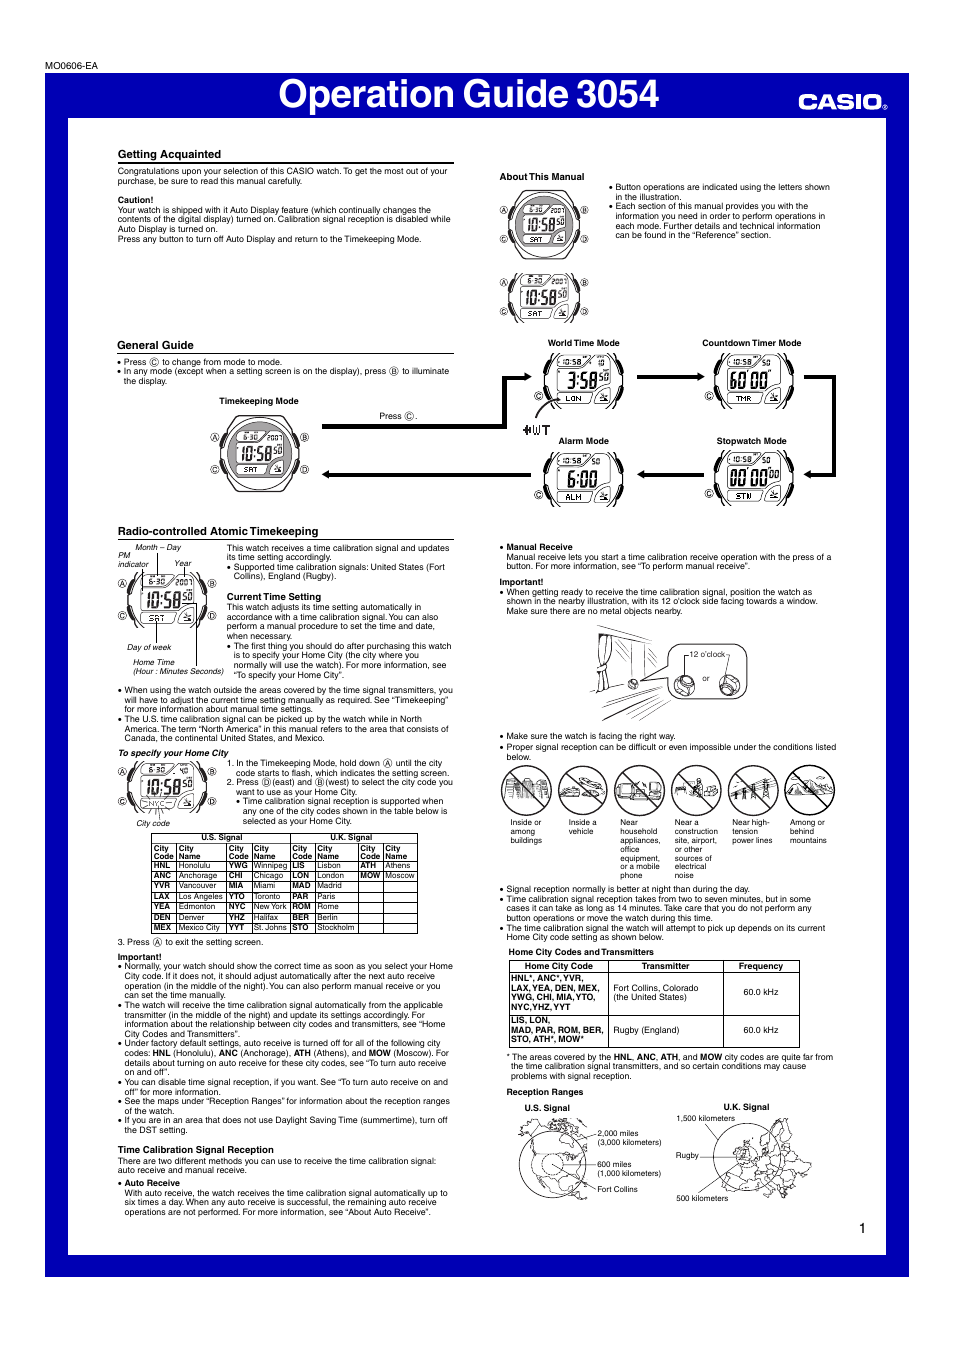 Casio Operation Guide 3054 User Manual | 5 pages